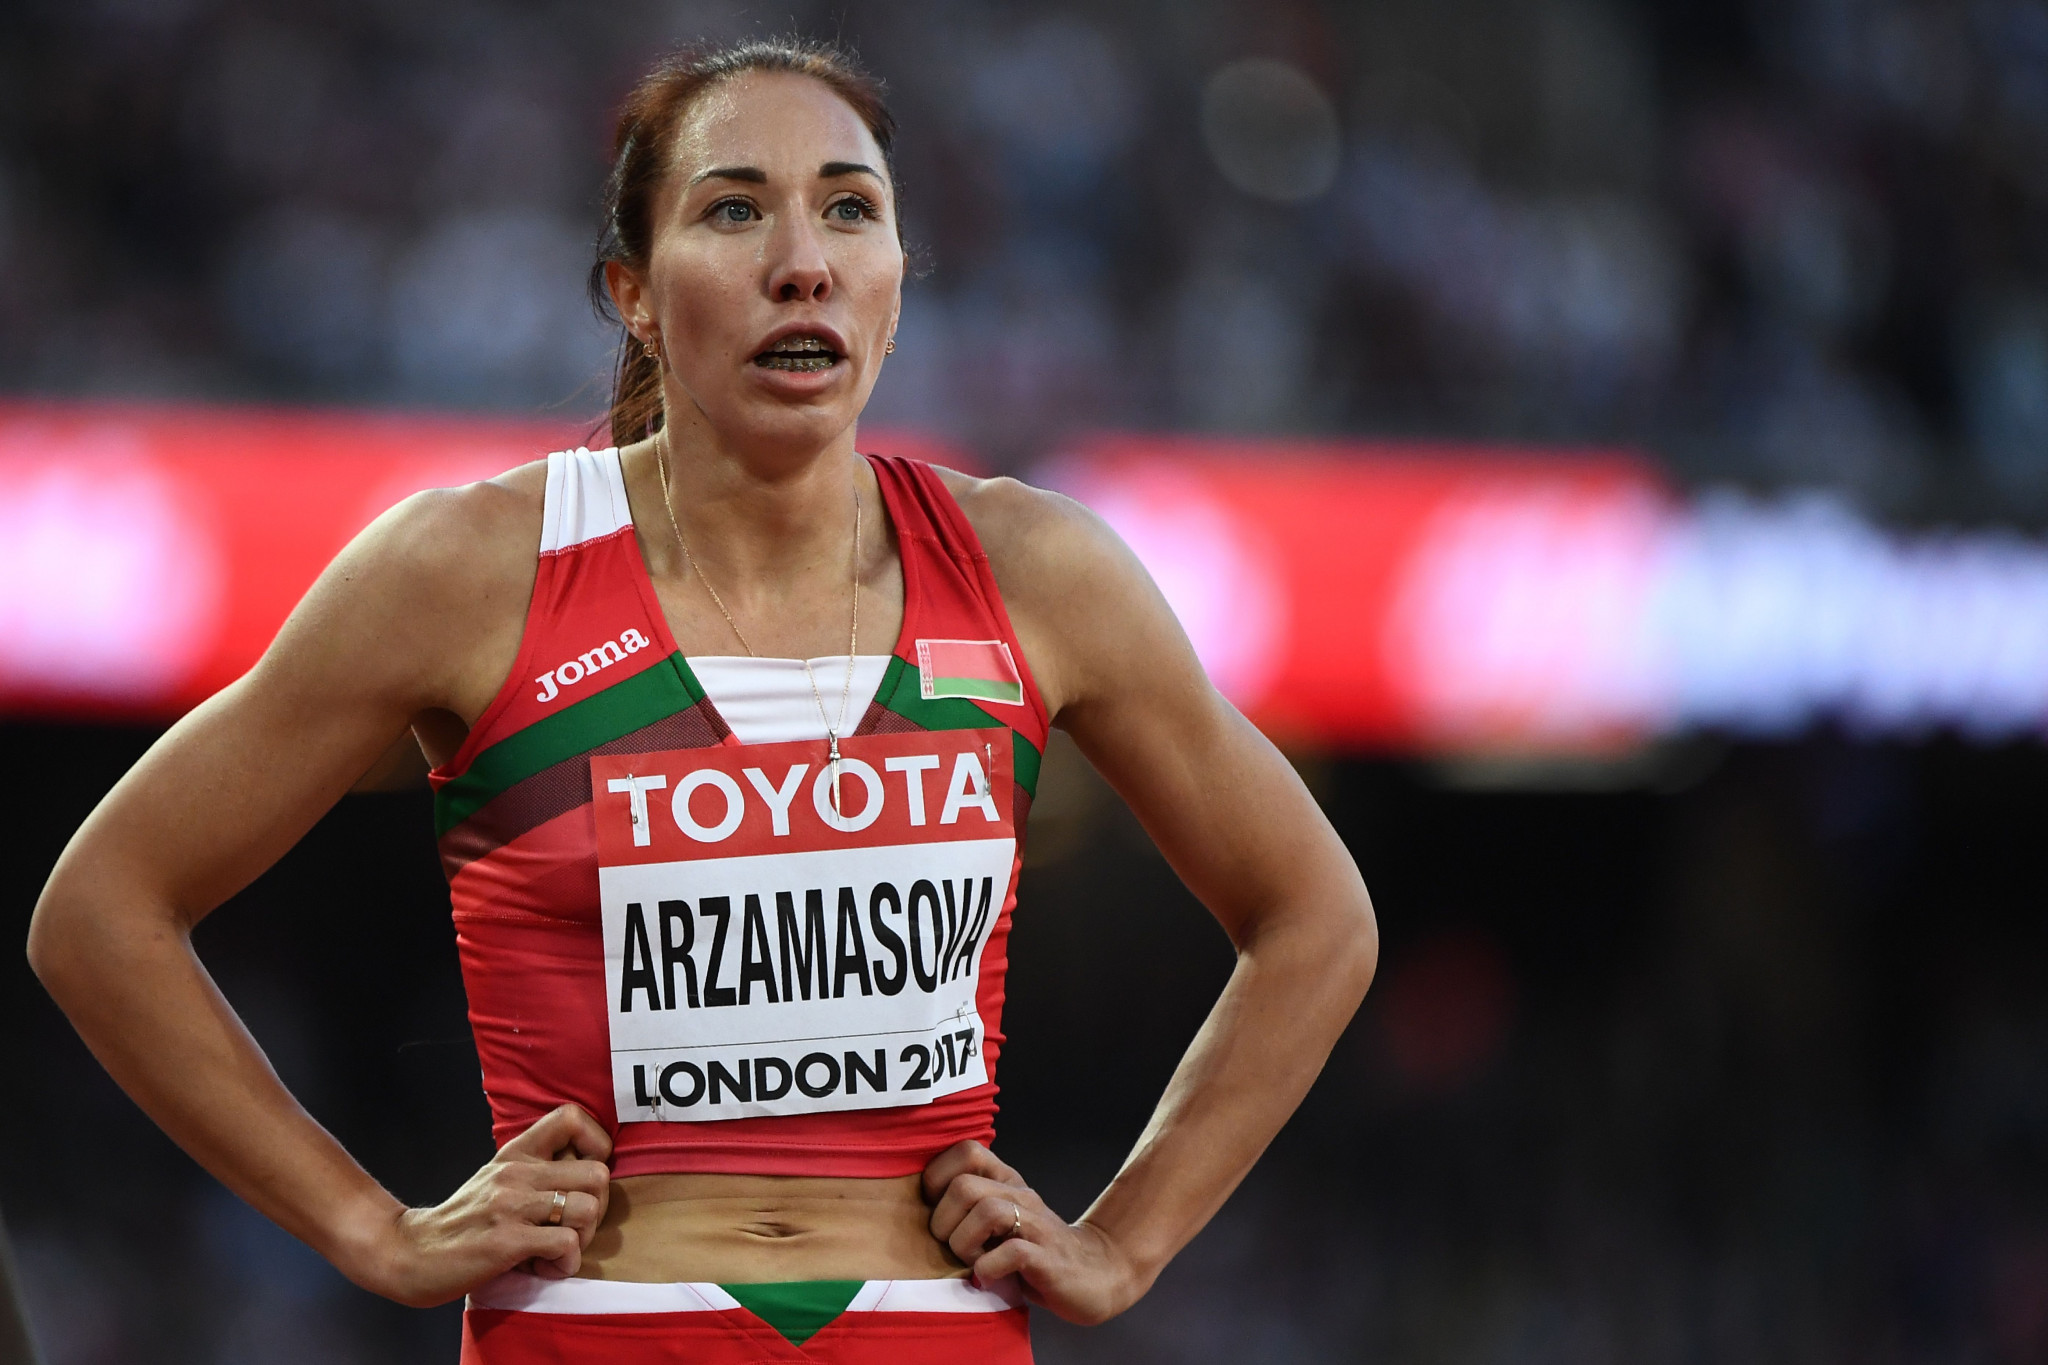 Former world 800m champion Arzamasova provisionally suspended by AIU